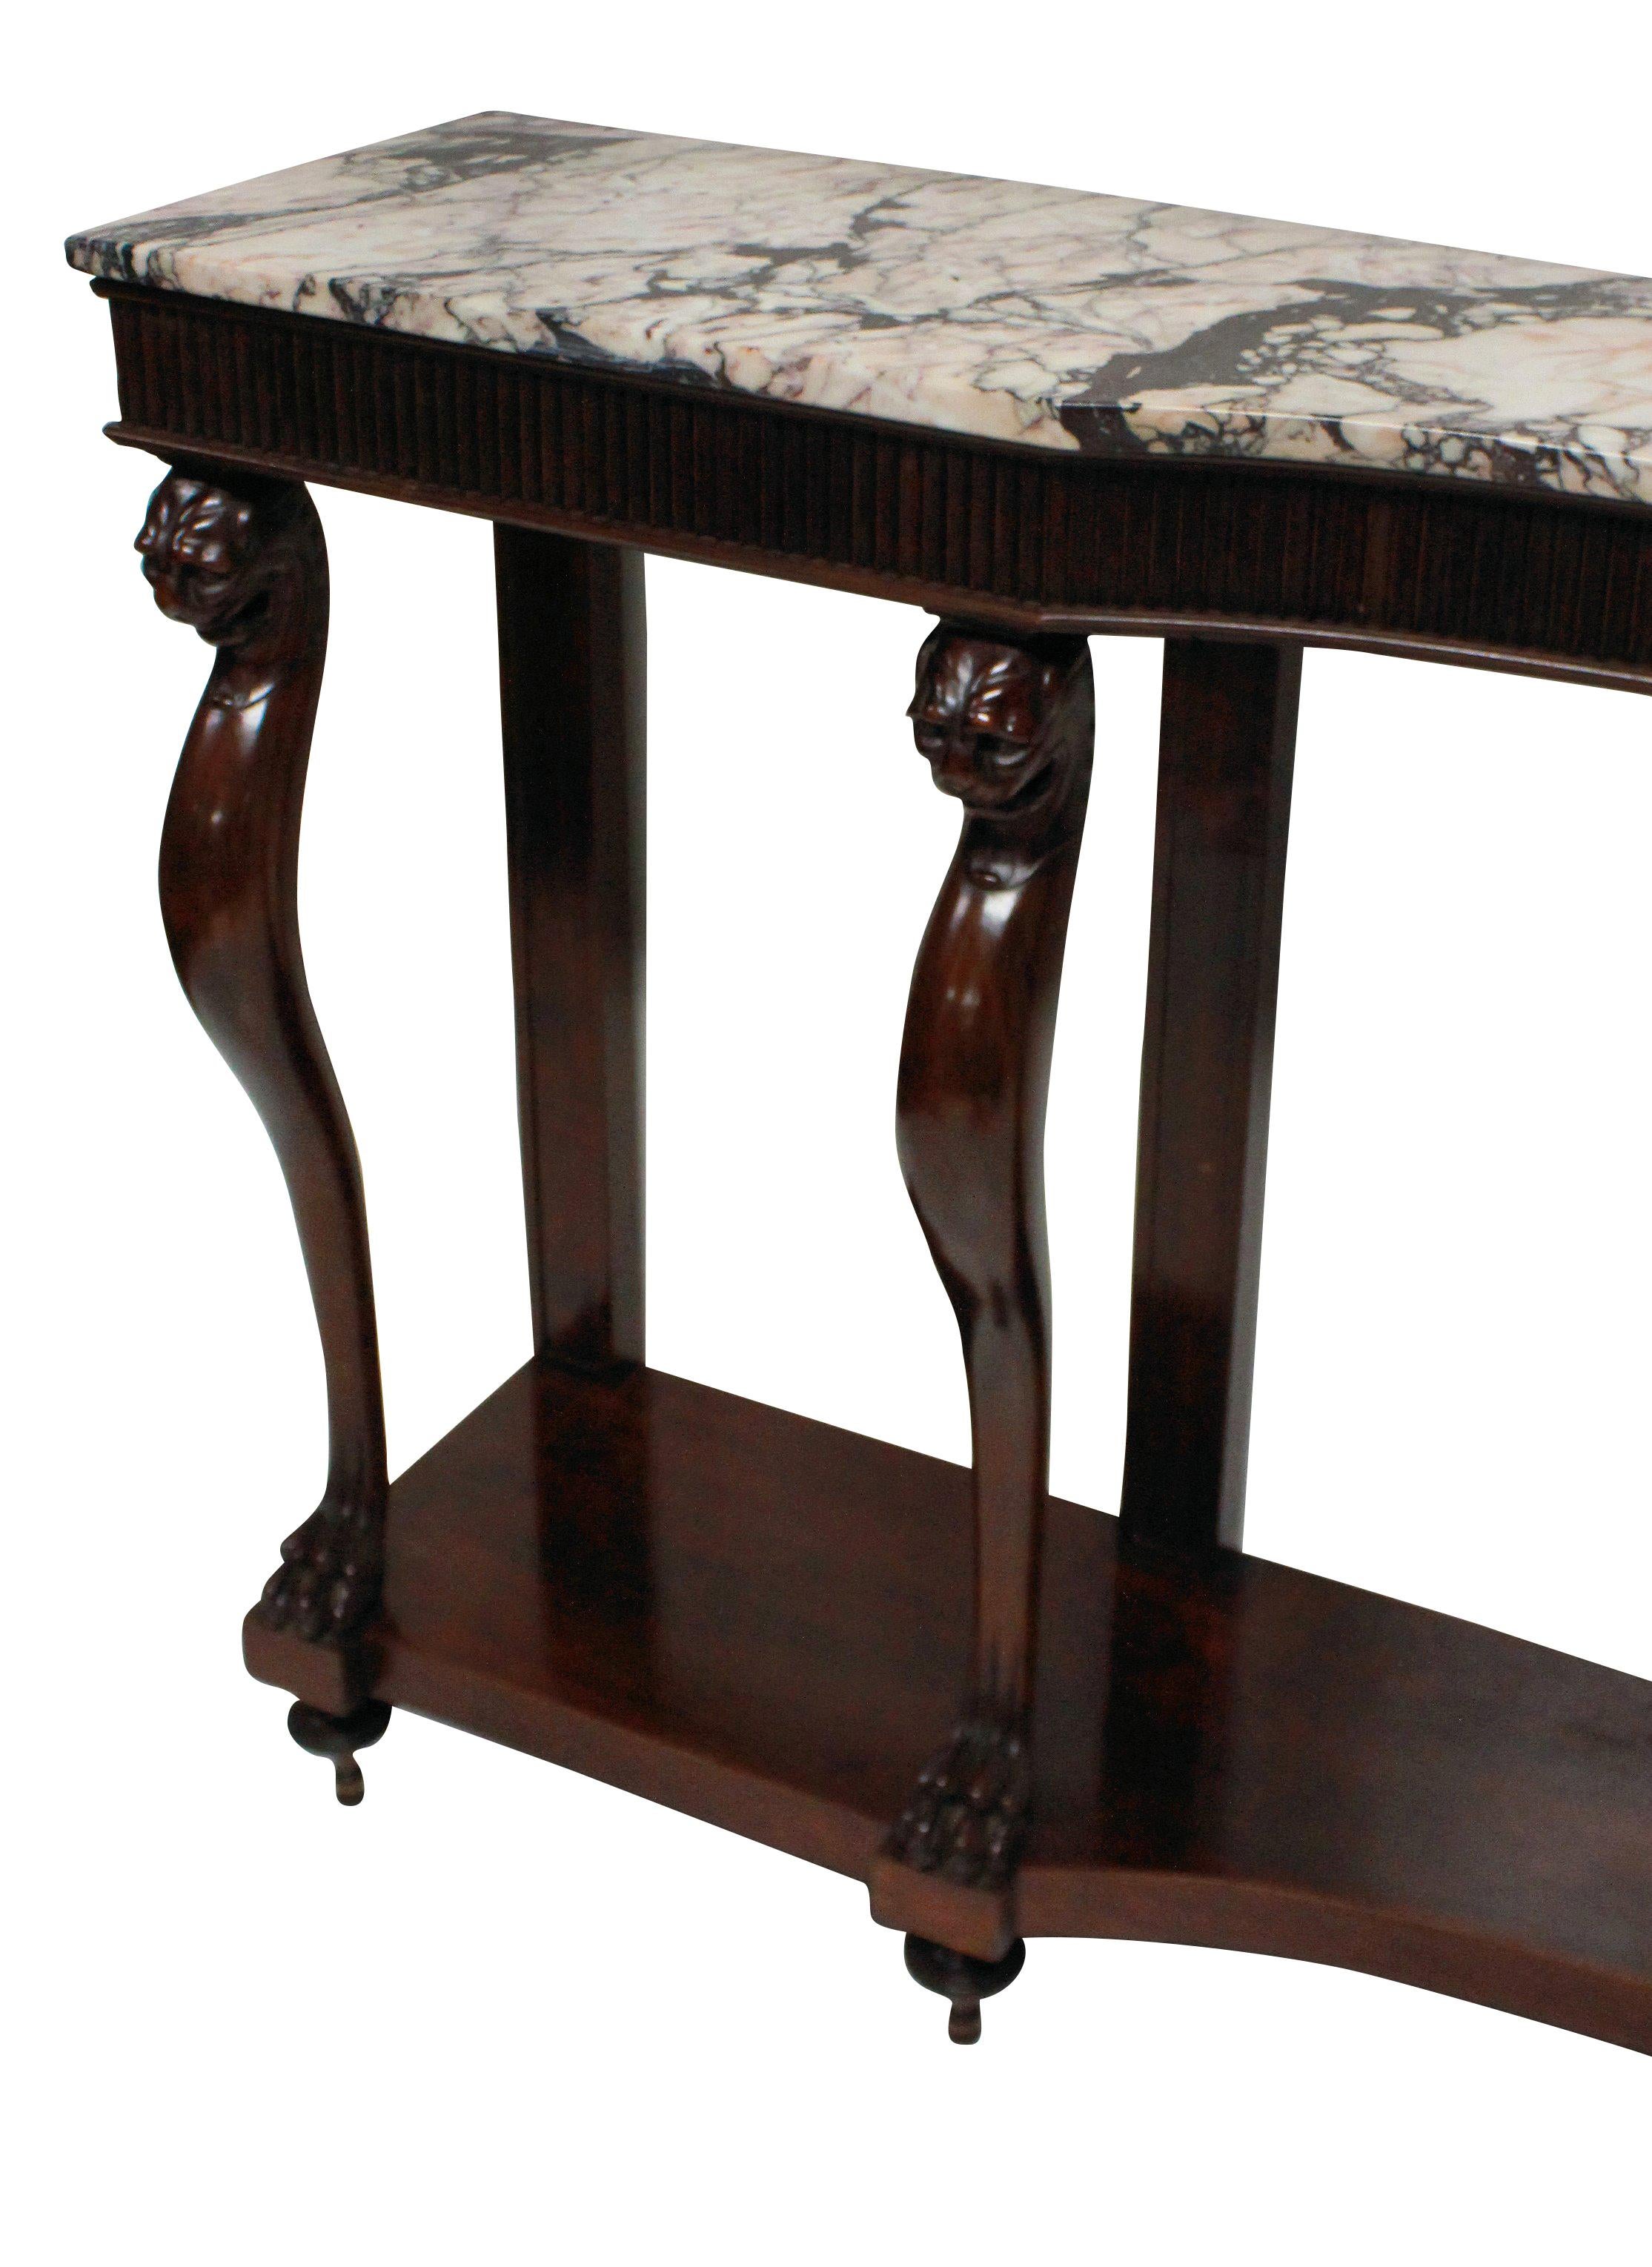 Mahogany Monumental Italian Neoclassical Marble-Top Console Table